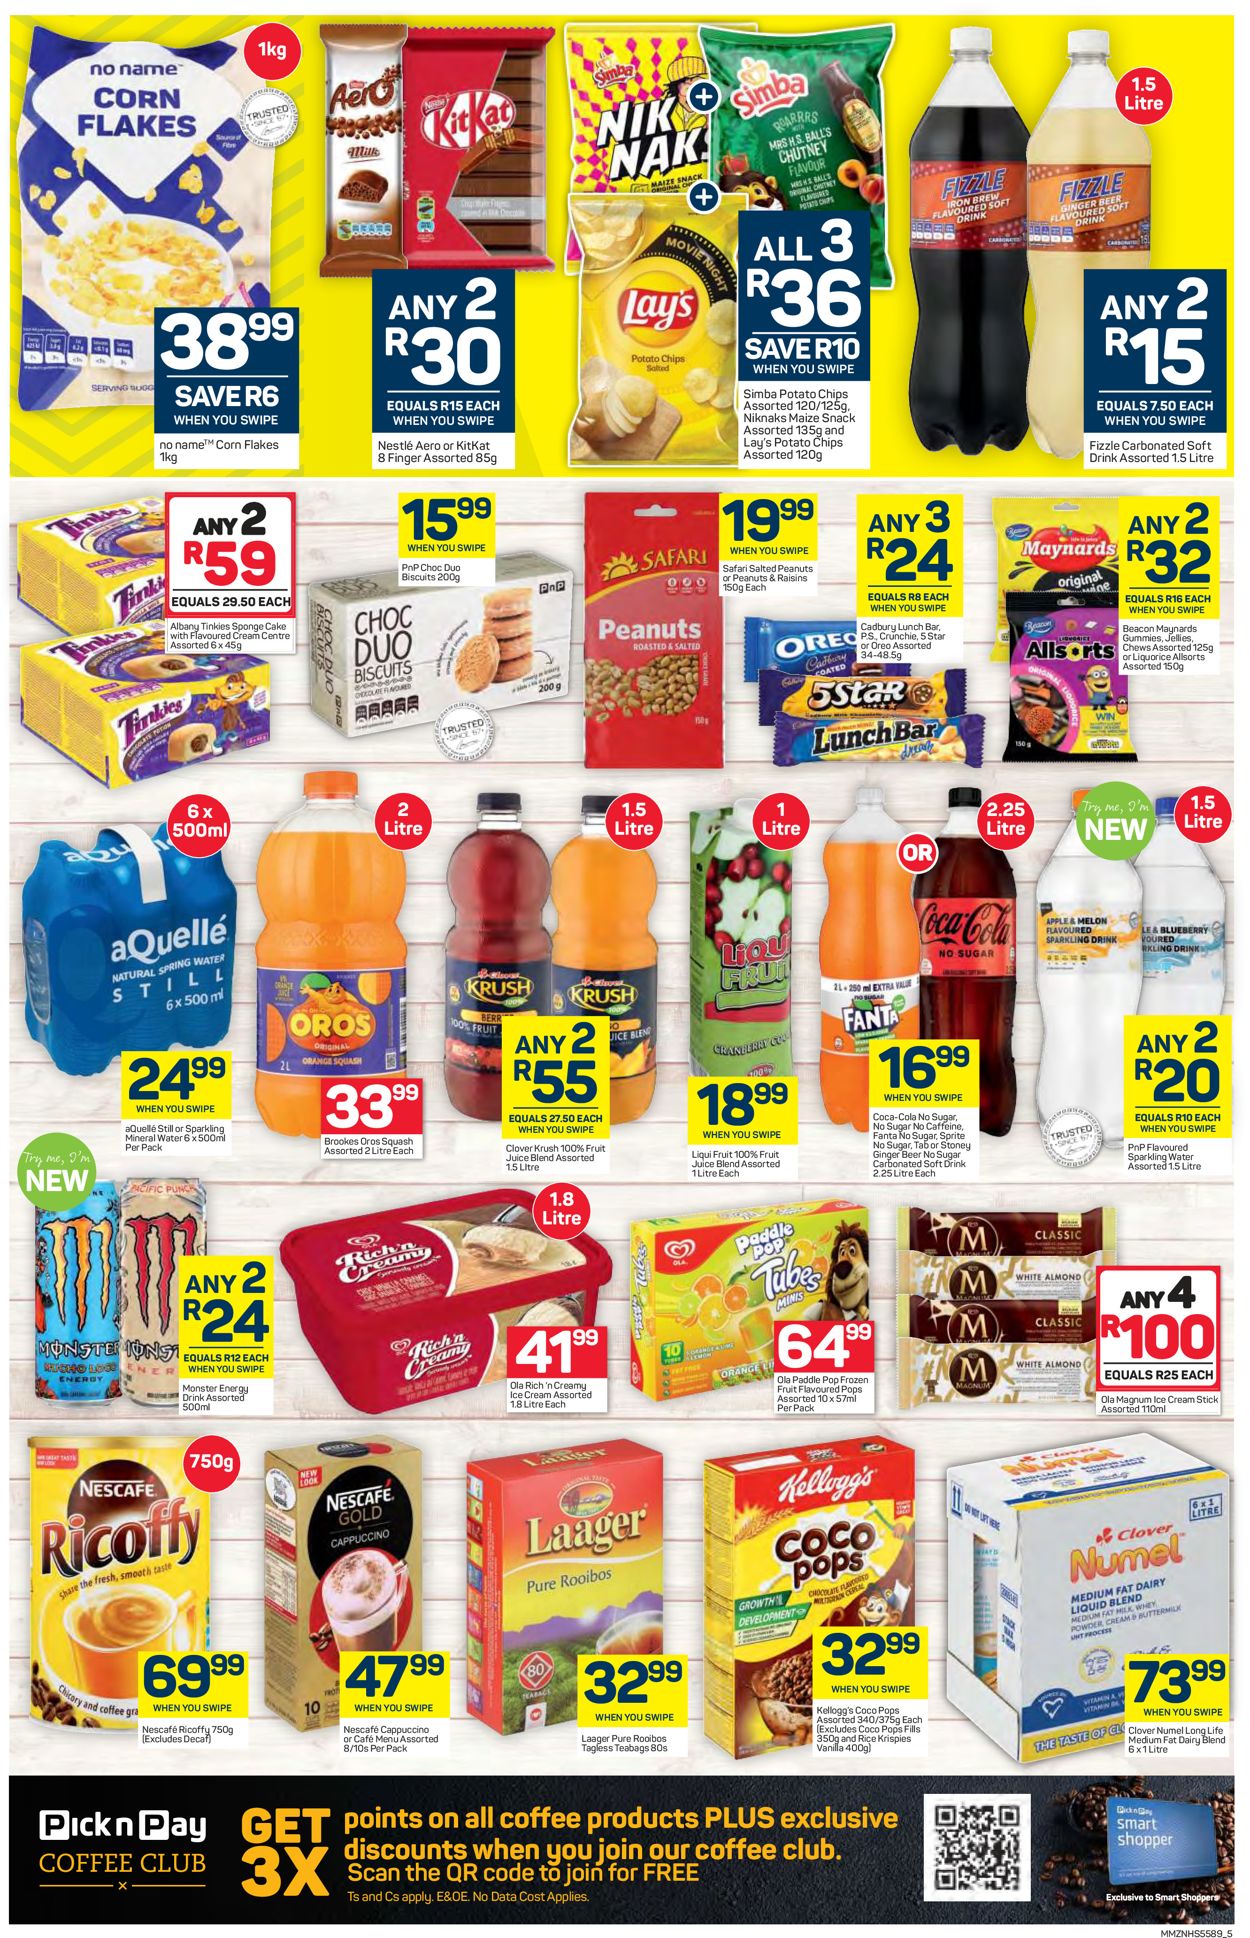 Pick n Pay Catalogue - 2021/09/13-2021/09/21 (Page 5)